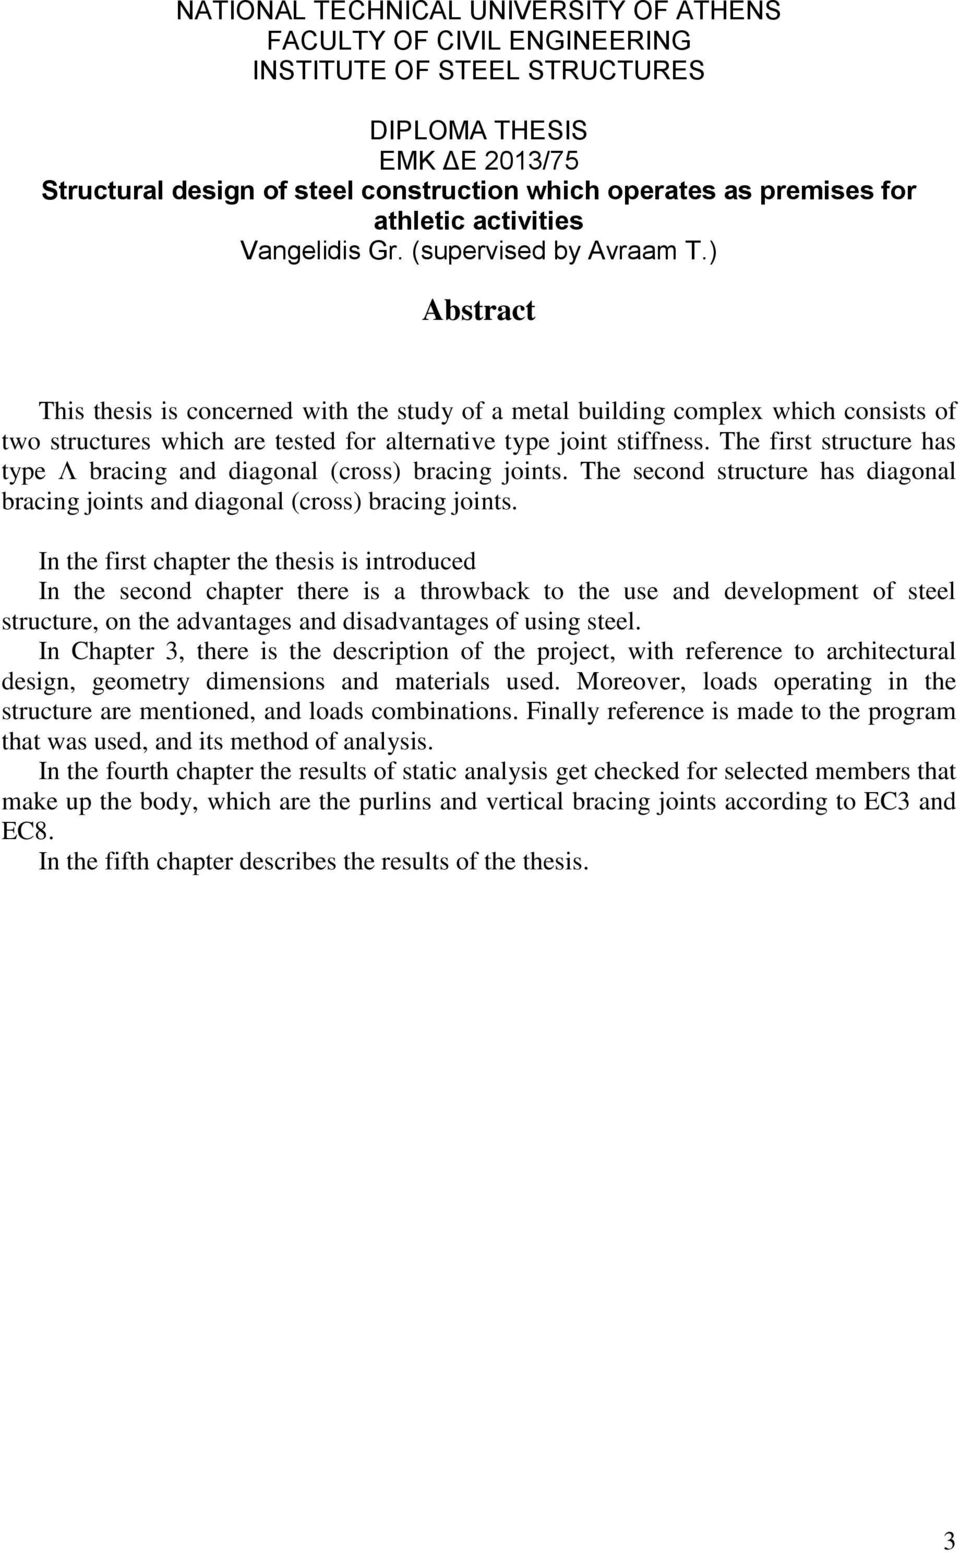 ) Abstract This thesis is concerned with the study of a metal building complex which consists of two structures which are tested for alternative type joint stiffness.